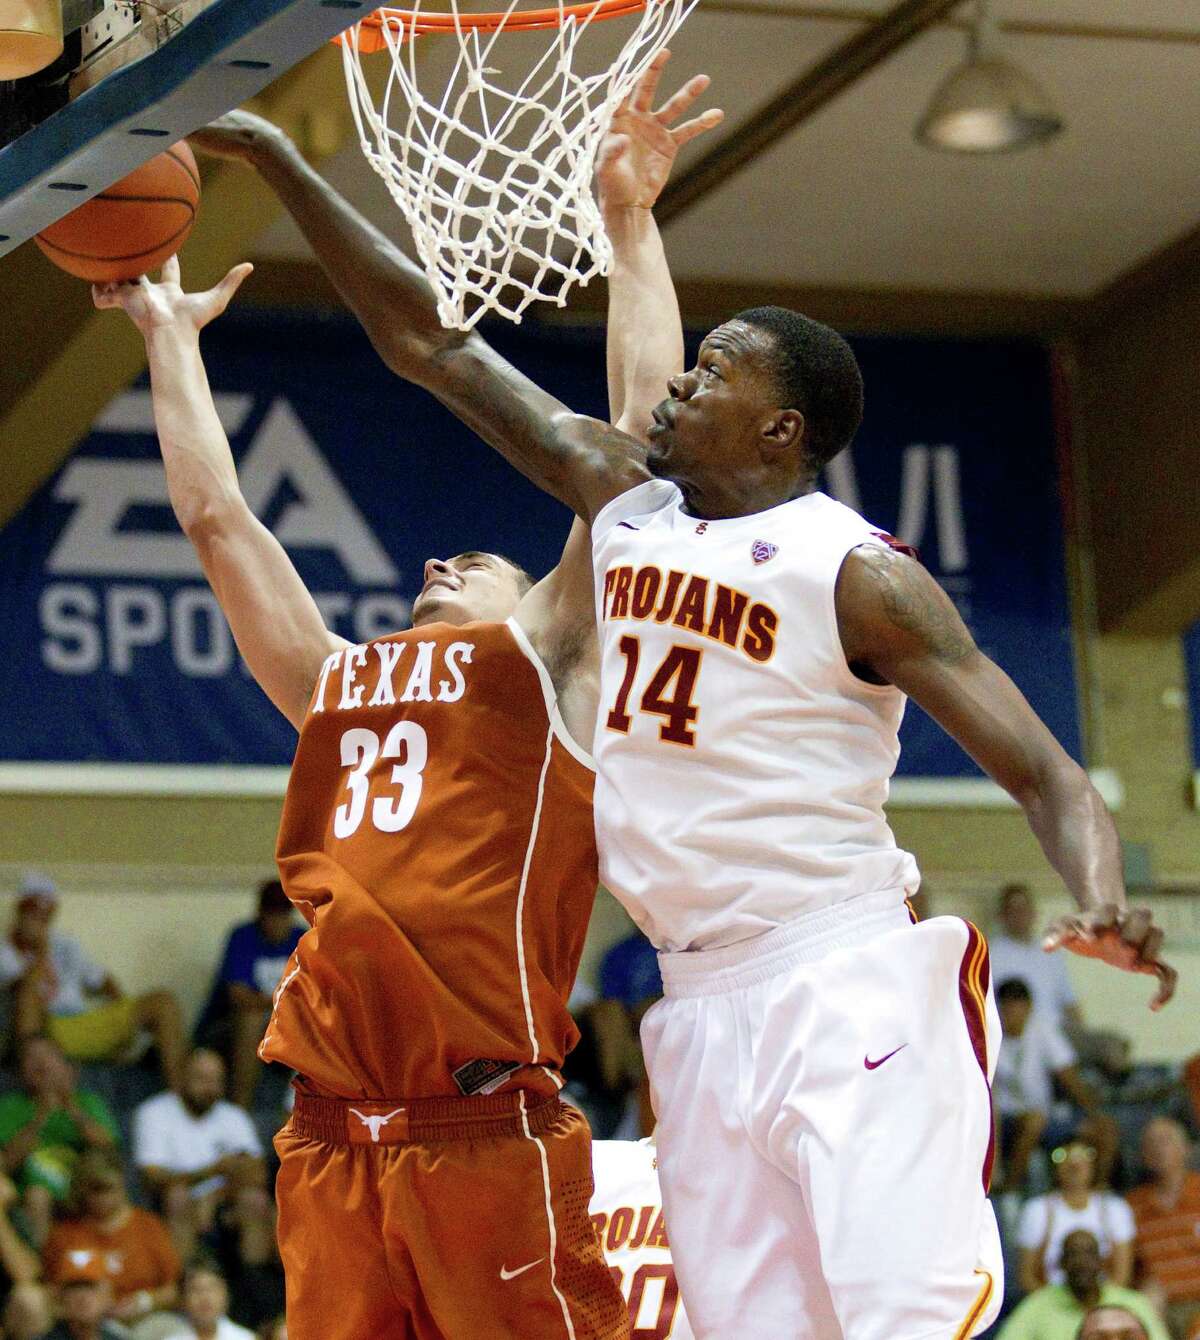 Texas forward Ioannis Papapetrou (33) goes for a layup as Southern California forward Dewayne Dedmon (14) deflects the shot in the second half of an NCAA college basketball game in the Maui Invitational on Tuesday, Nov. 20, 2012, in Lahaina, Hawaii. Southern California defeated Texas 59-53 in overtime. (AP Photo/Eugene Tanner)